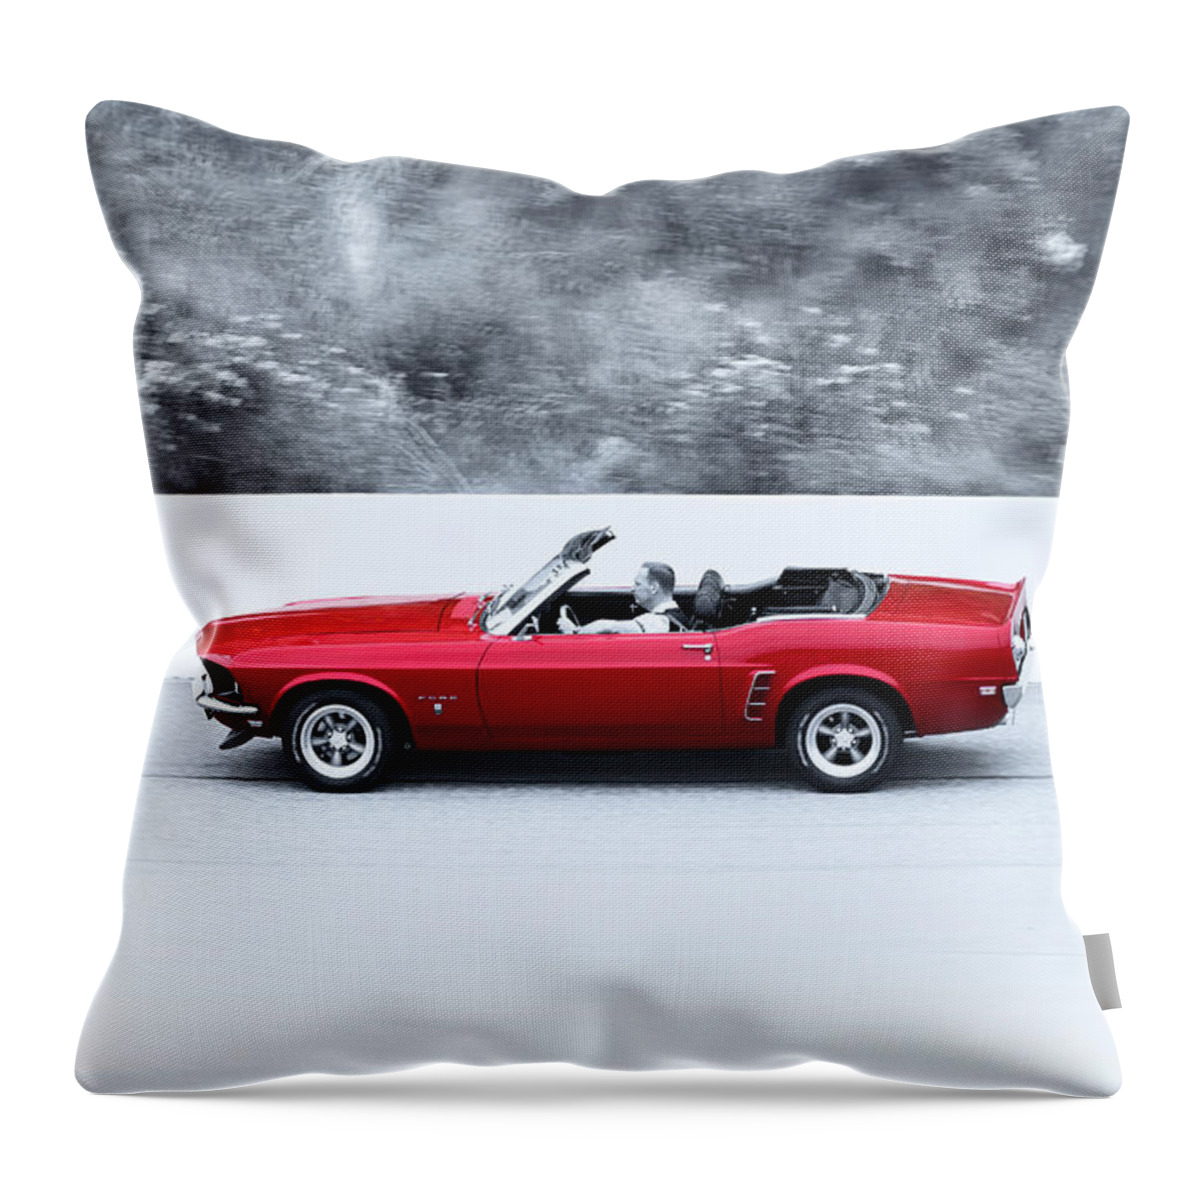 Easy Throw Pillow featuring the photograph Easy 2 by Jaroslav Buna